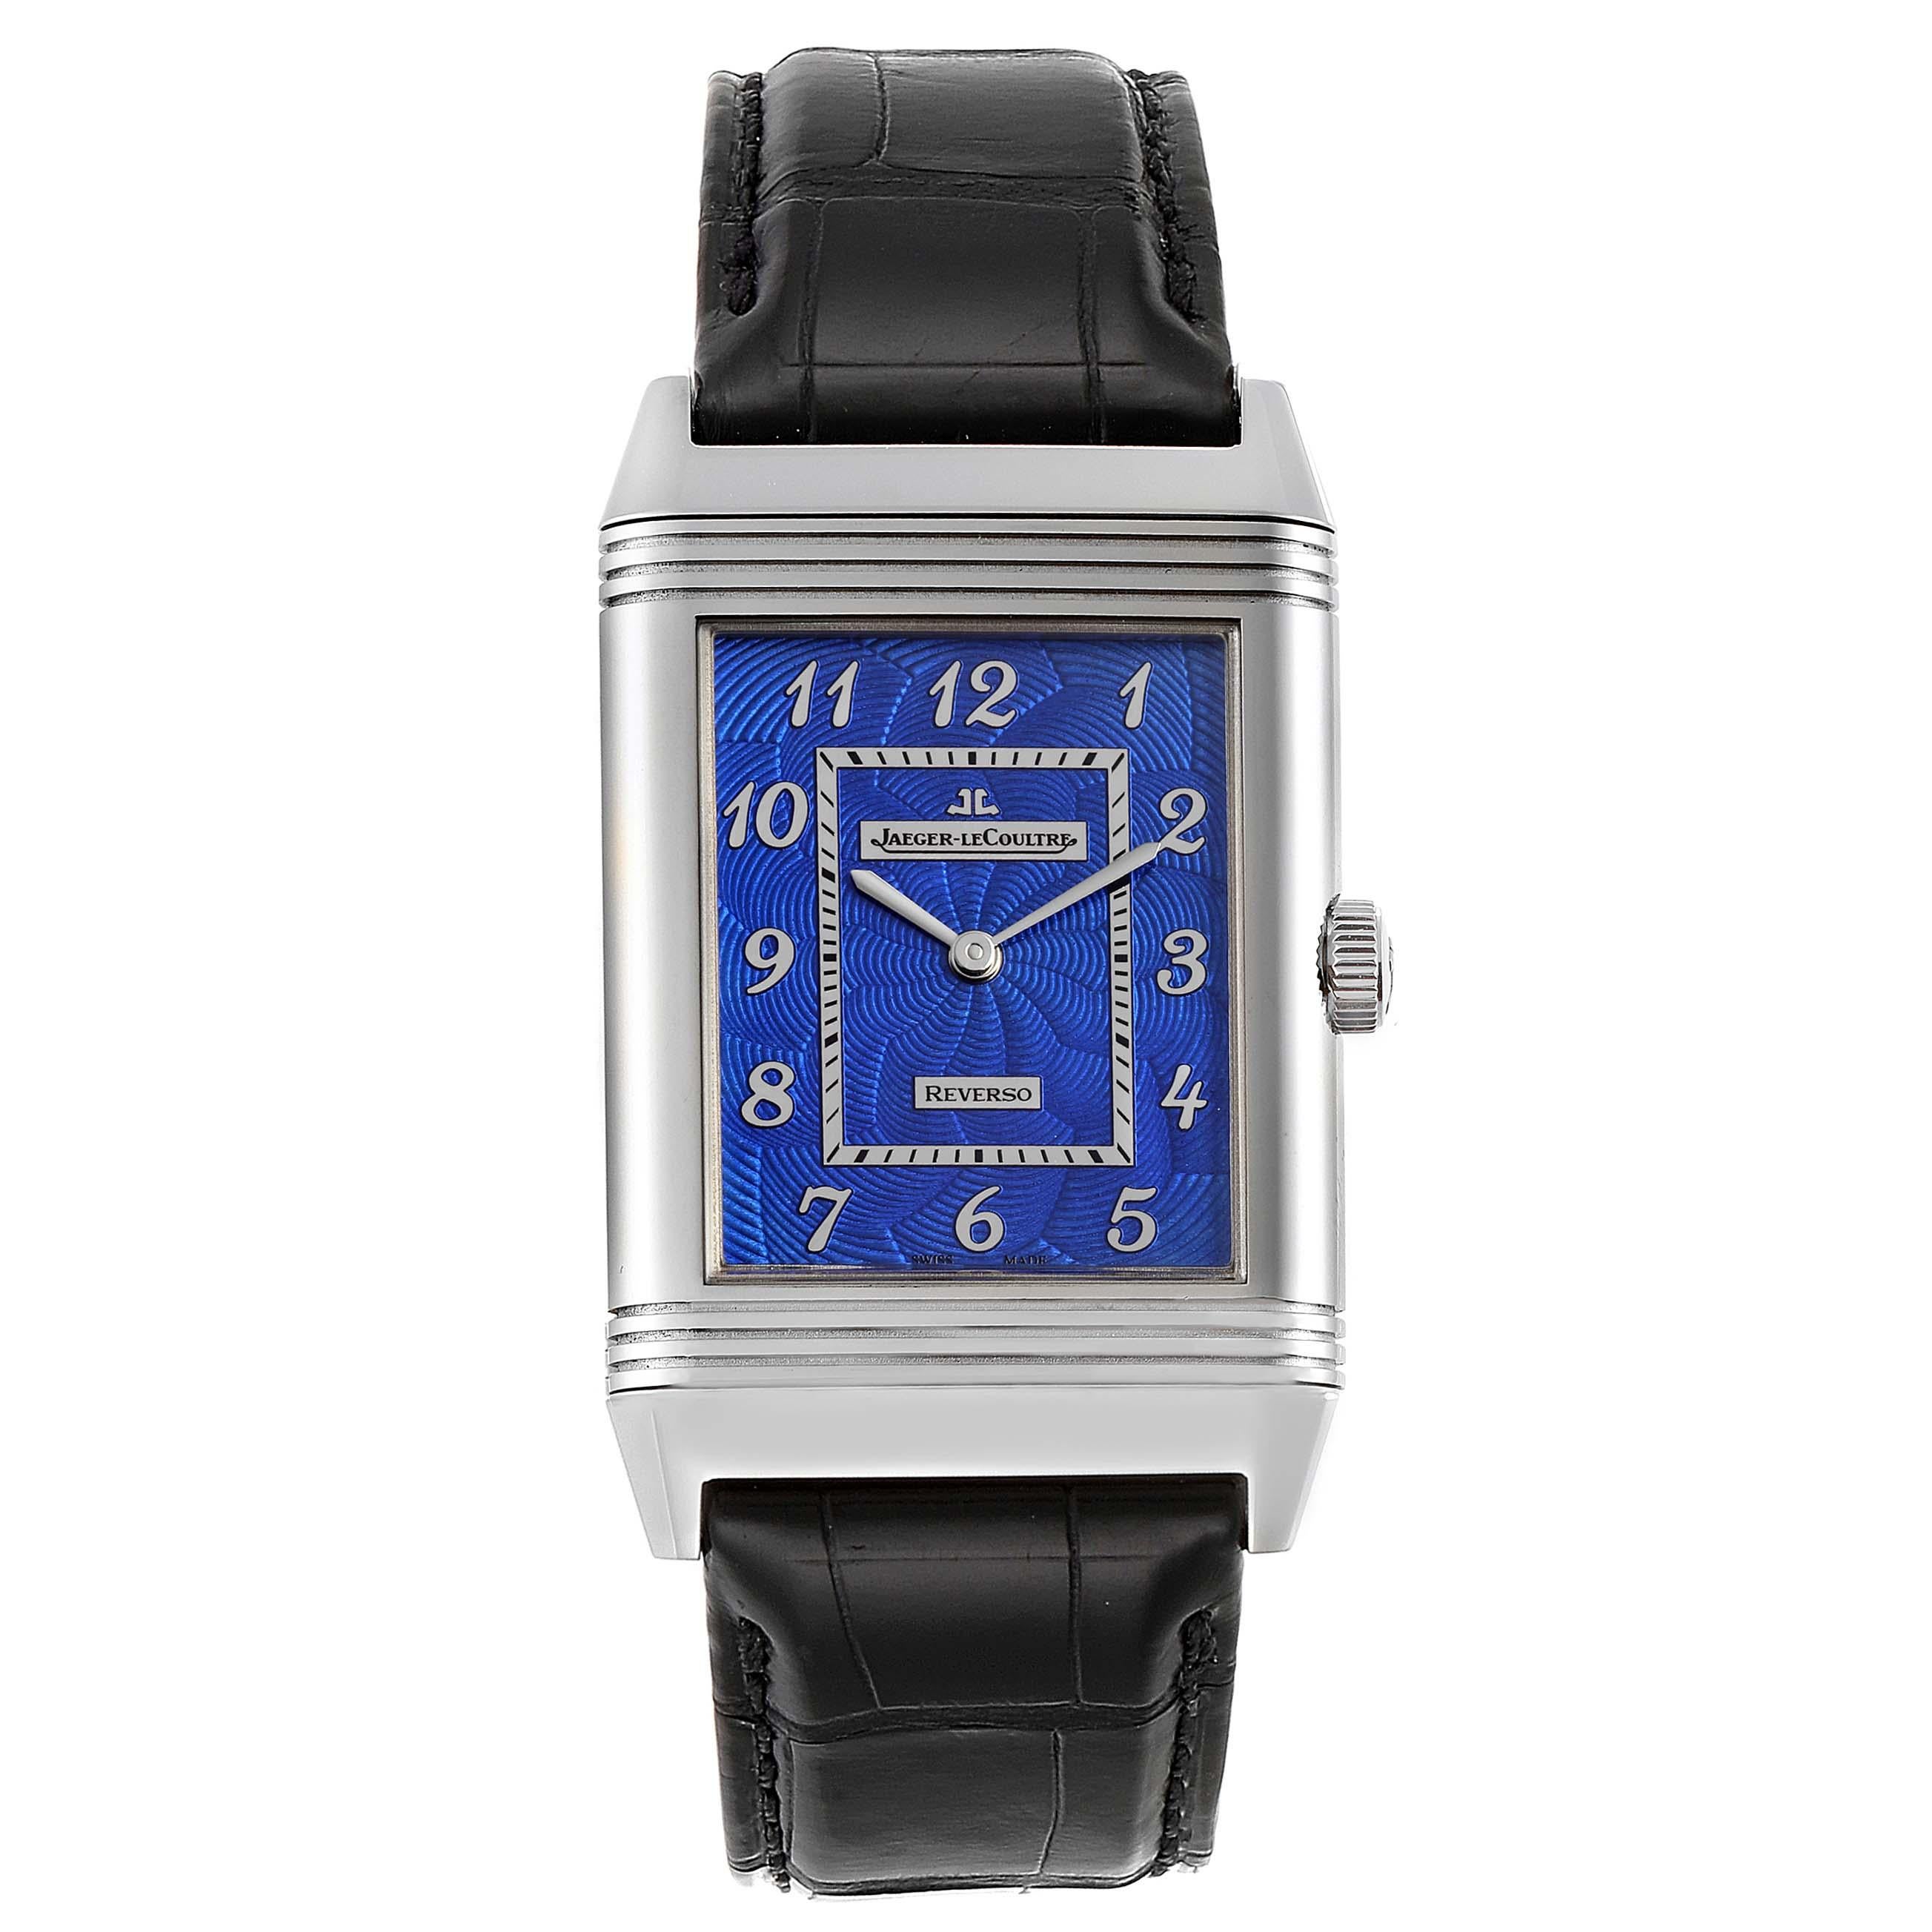 Jaeger LeCoultre Grande Reverso White Gold Limited Watch 273.3.62 Box Card. Manual-winding movement. 18K white gold 49 mm x 30 mm rectangular rotating case. Solid case back. 18K white gold reeded bezel. Scratch resistant sapphire crystal. Blue